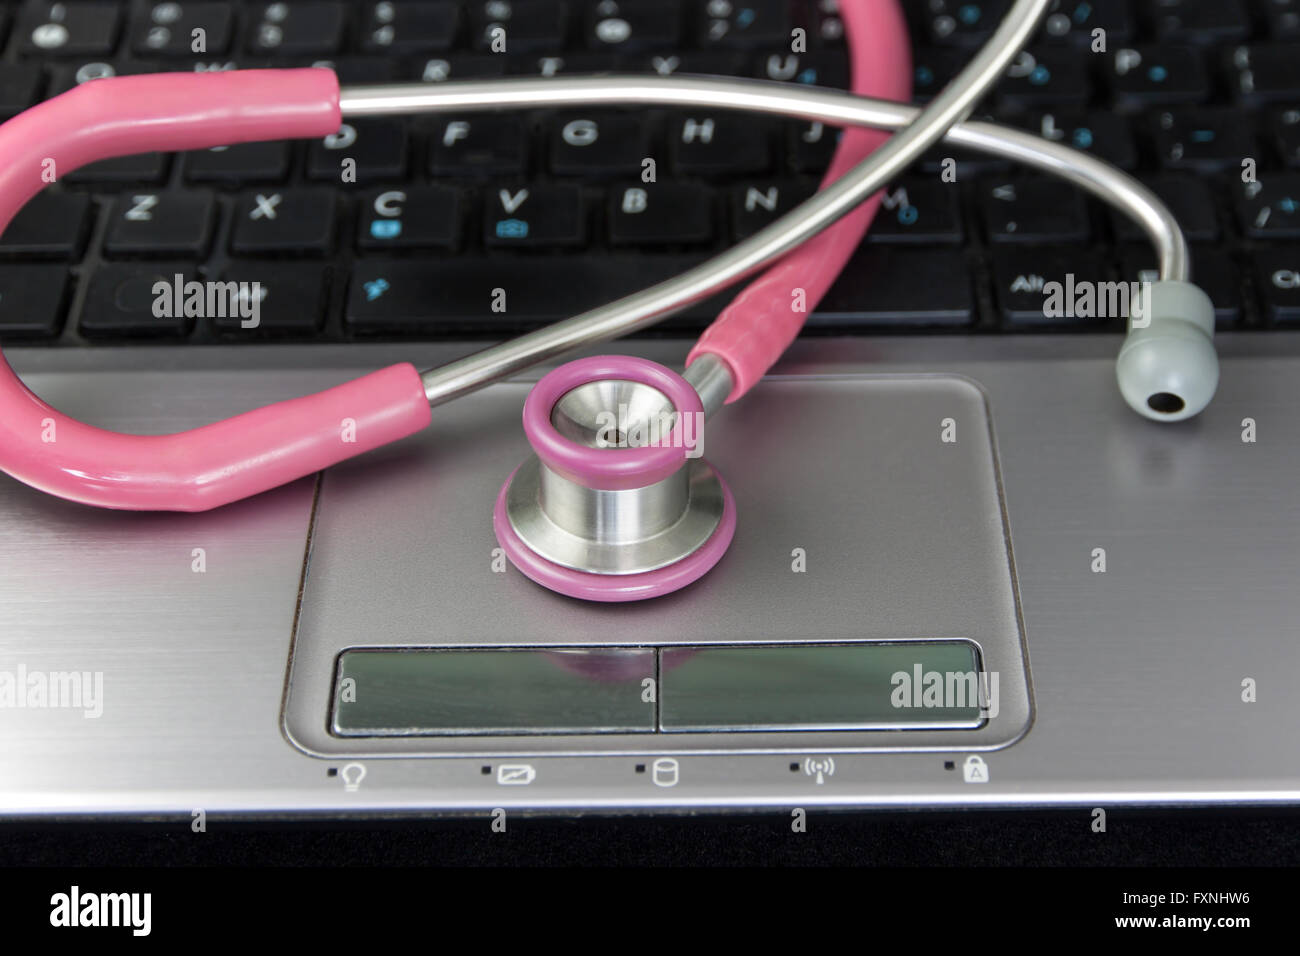 Stethoscope and Laptop.Maintaining computer concepts and idea. Stock Photo